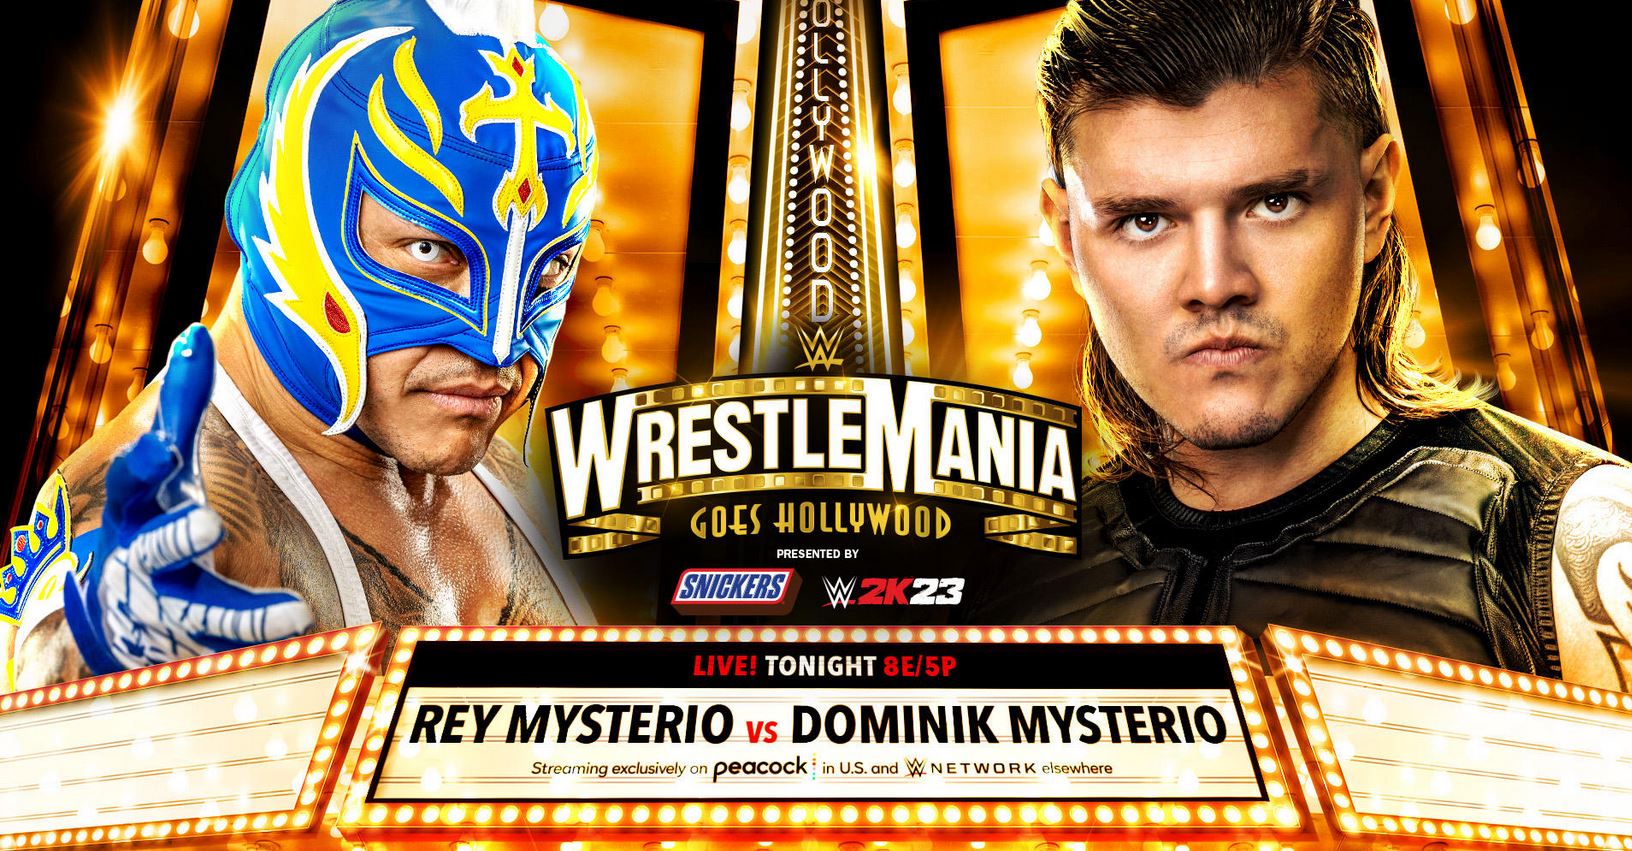 WWE Producers Revealed for Night 1 of WrestleMania 39